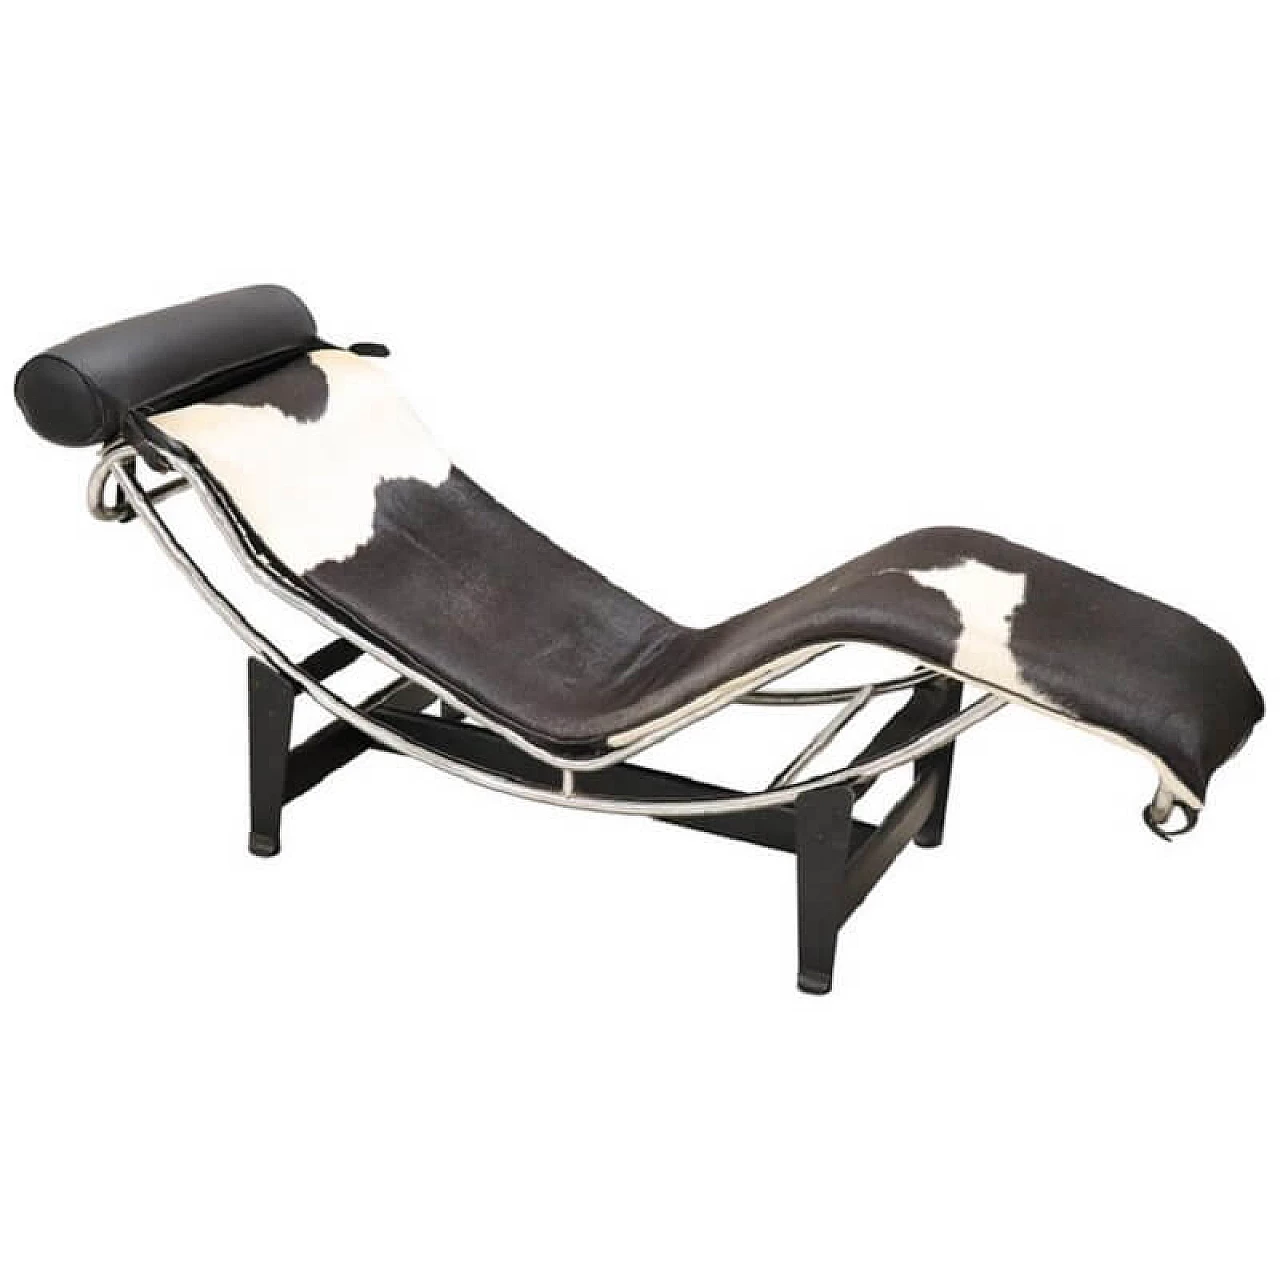 LC4 chaise longue, Le Corbusier style in natural leather, 1980s 1083598